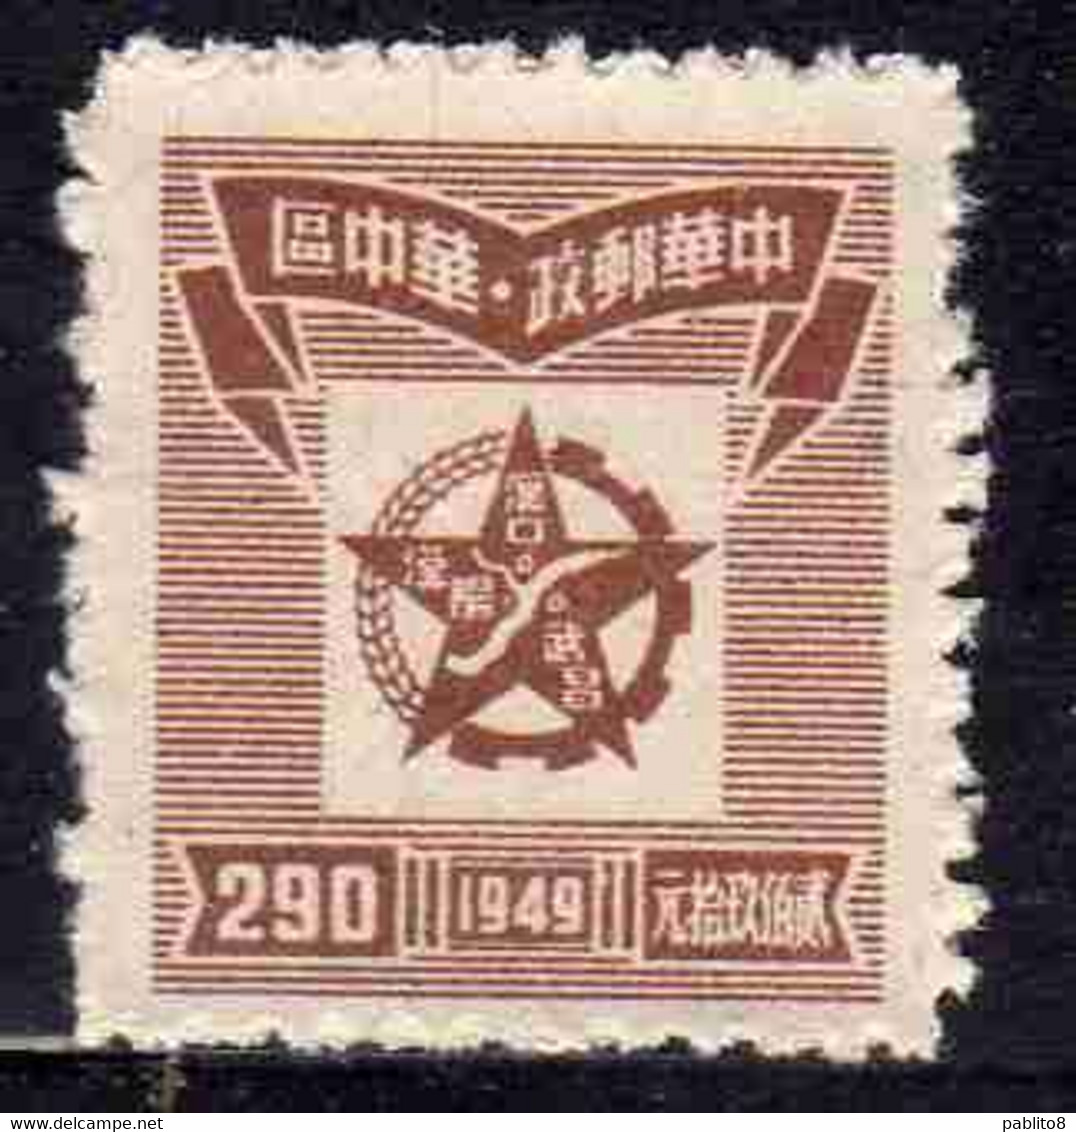 CENTRAL CHINA CINA CENTRALE 1949 Posts And Telegraph ADMINISTRATION Star Enclosing Map Of Hankow Area 290$ NG - Chine Centrale 1948-49